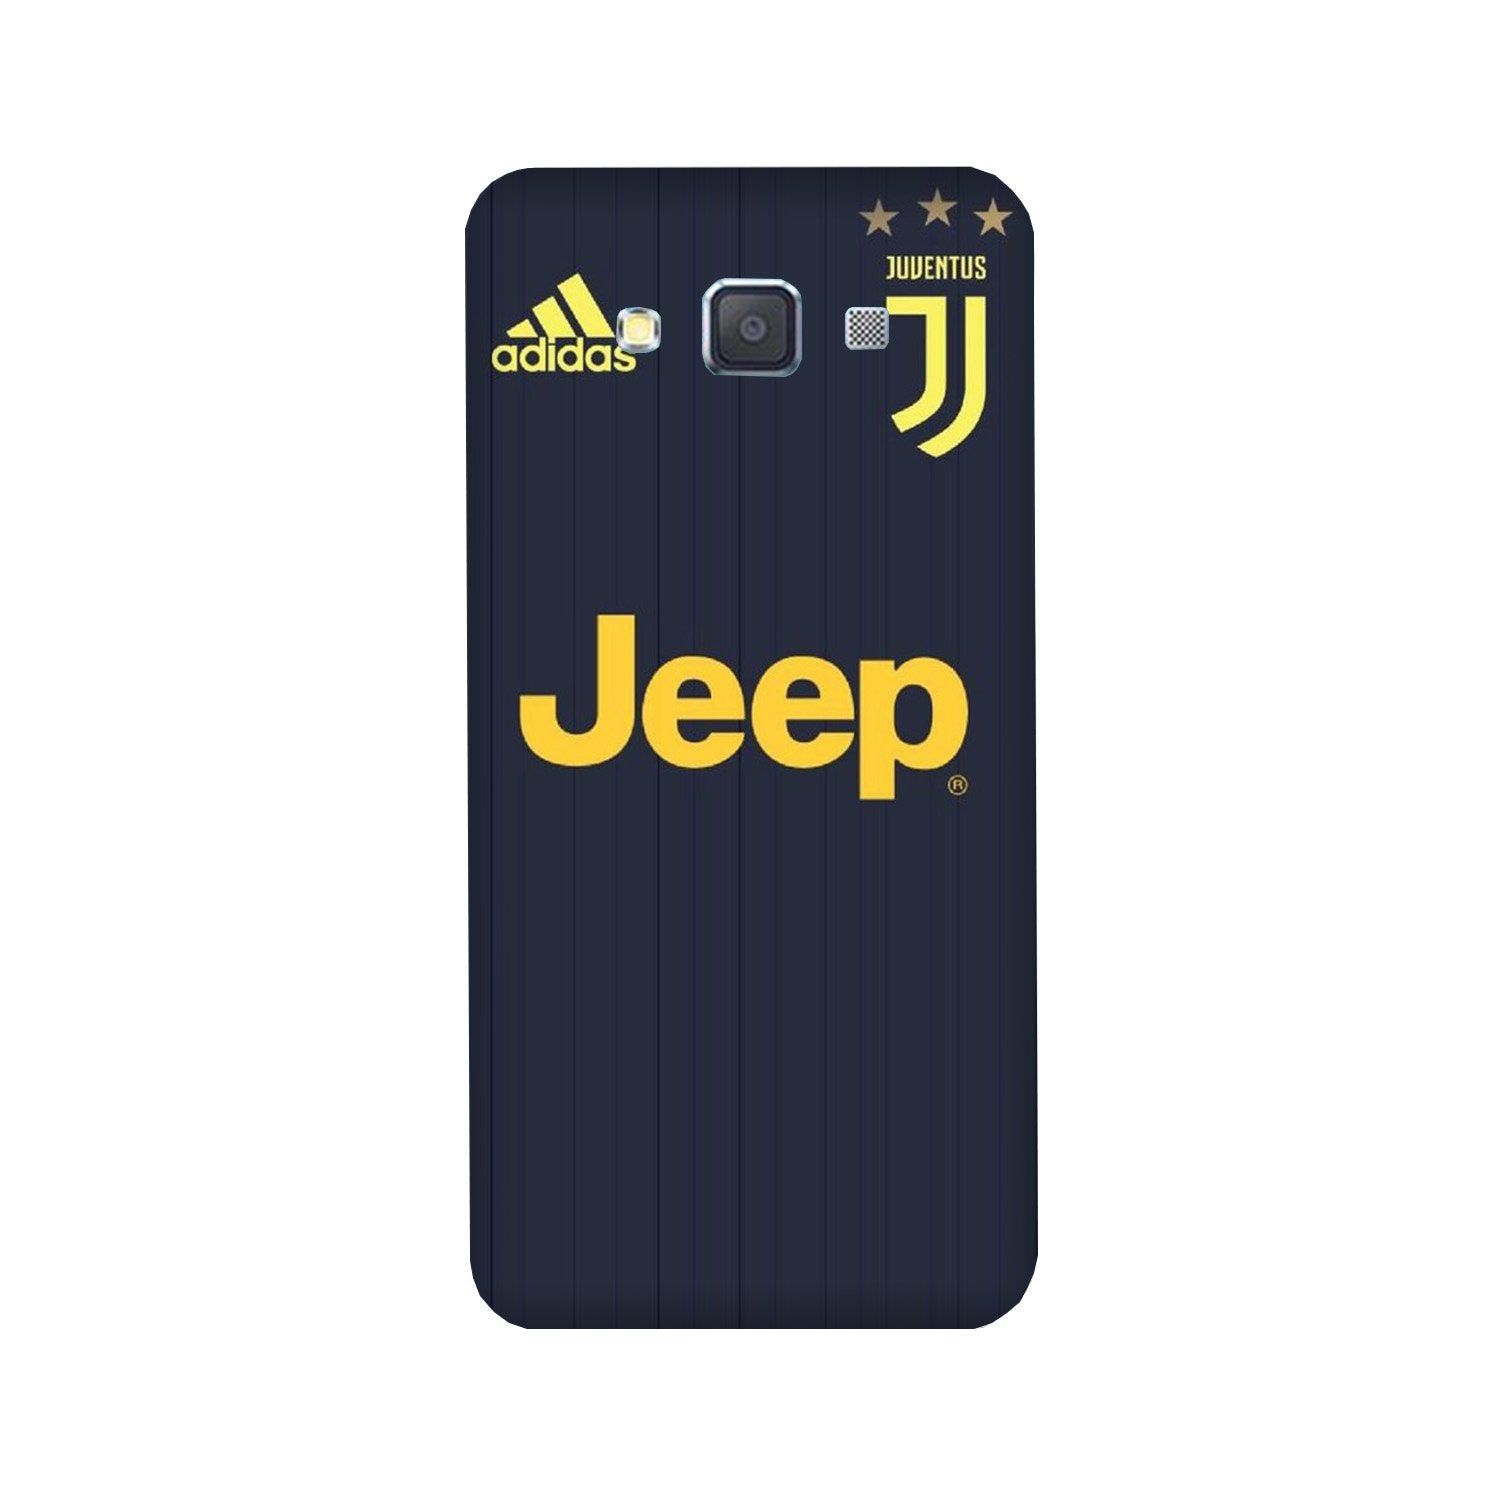 Jeep Juventus Case for Galaxy Grand 2(Design - 161)